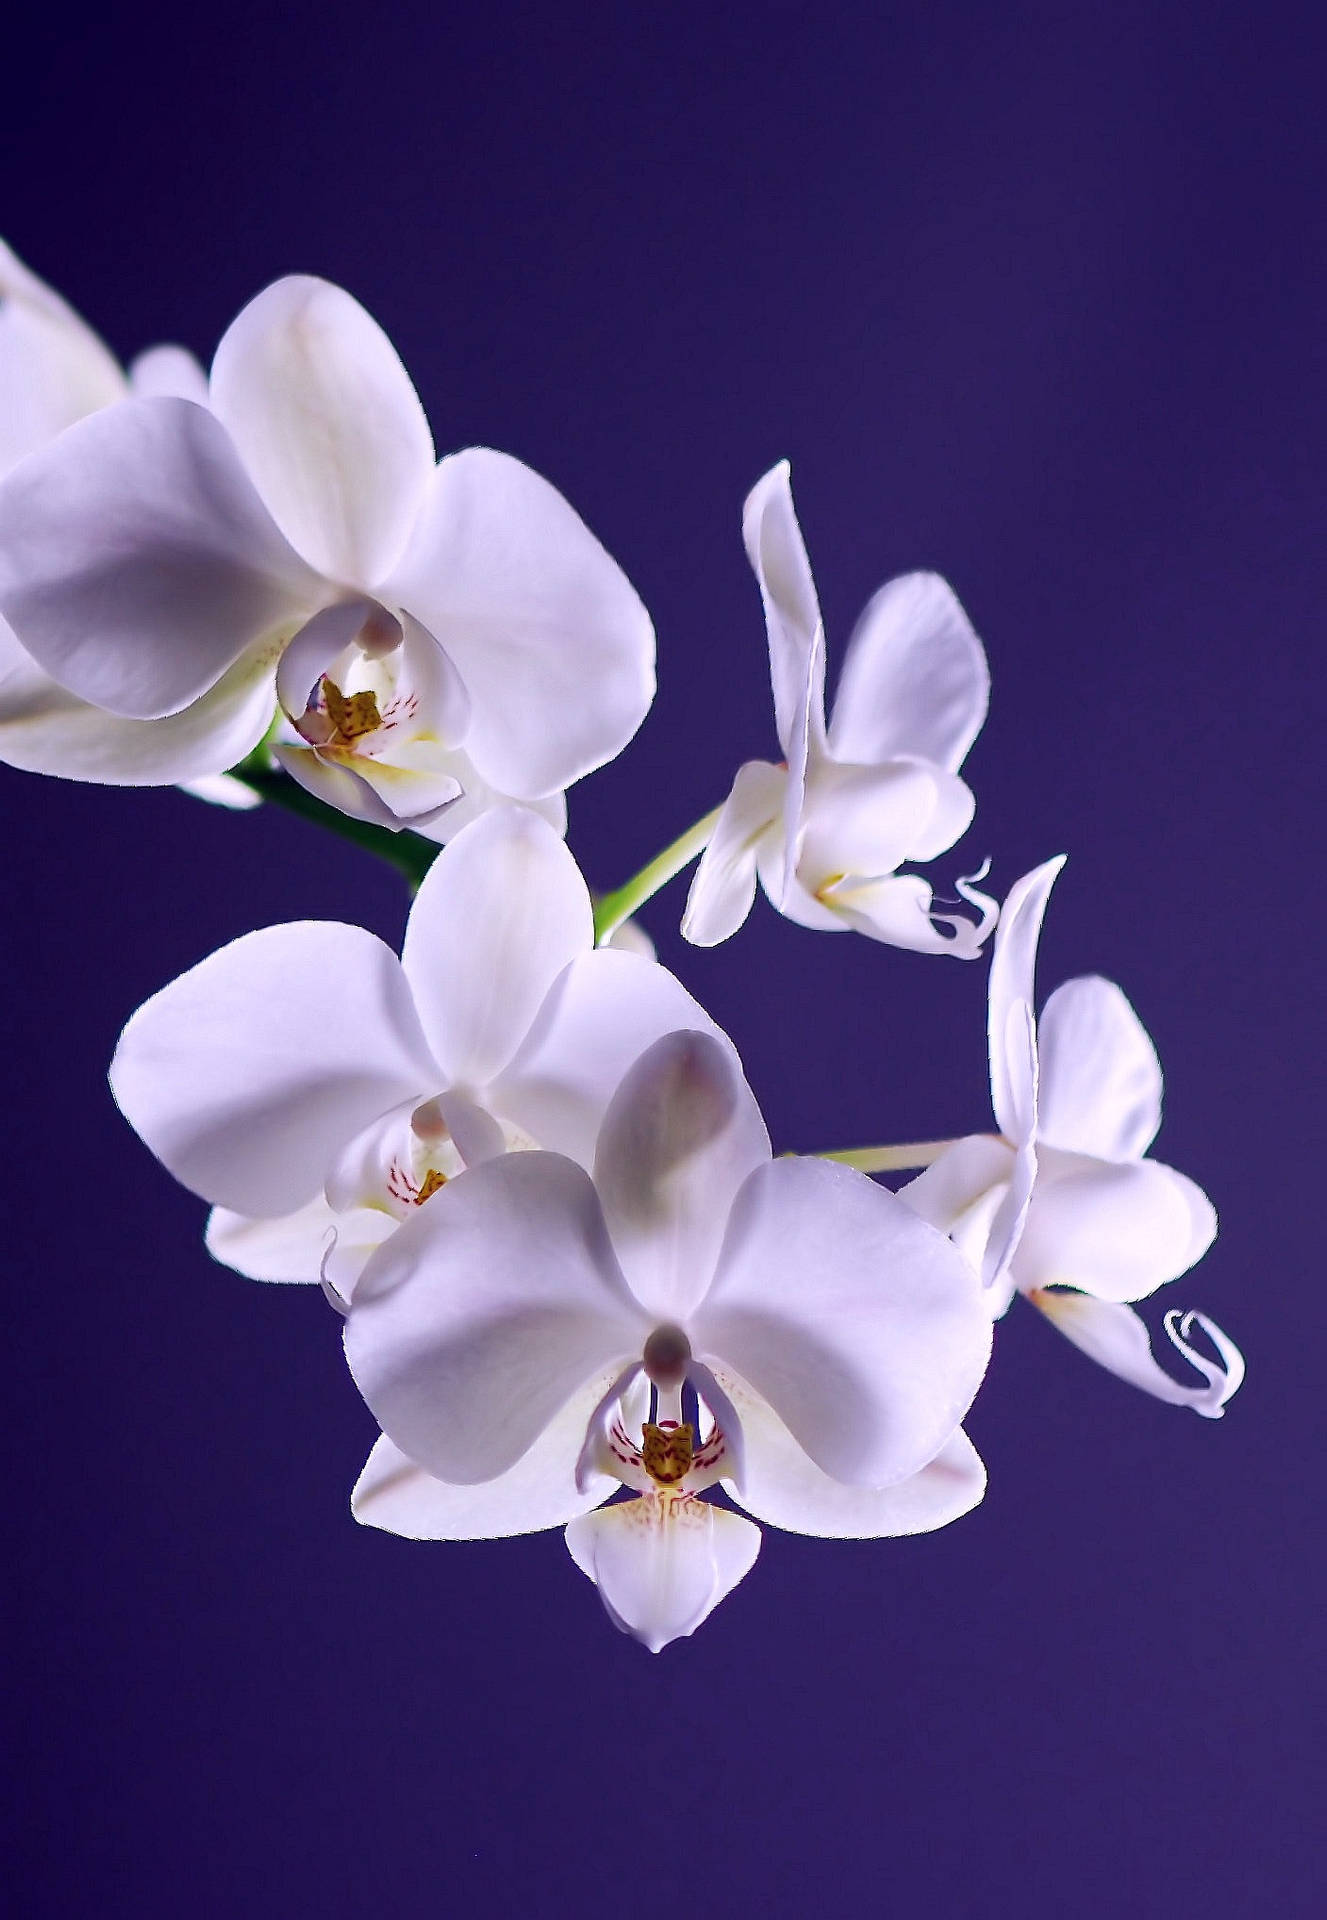 Caption: Serenity In Bloom - Elegant White Orchid Flowers Background